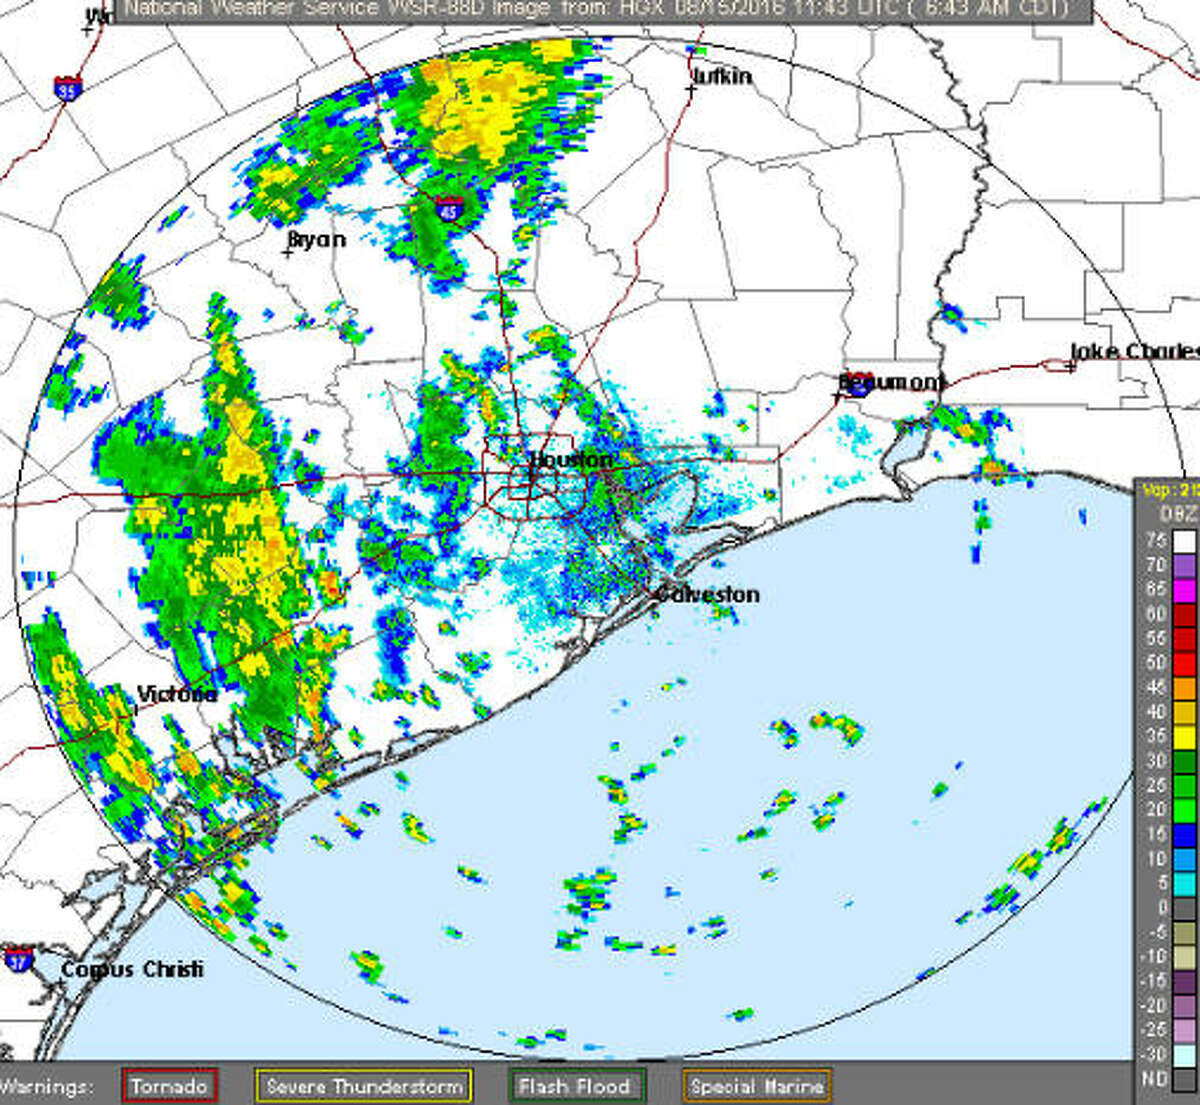 Flash Flood Watch extended for Houston area